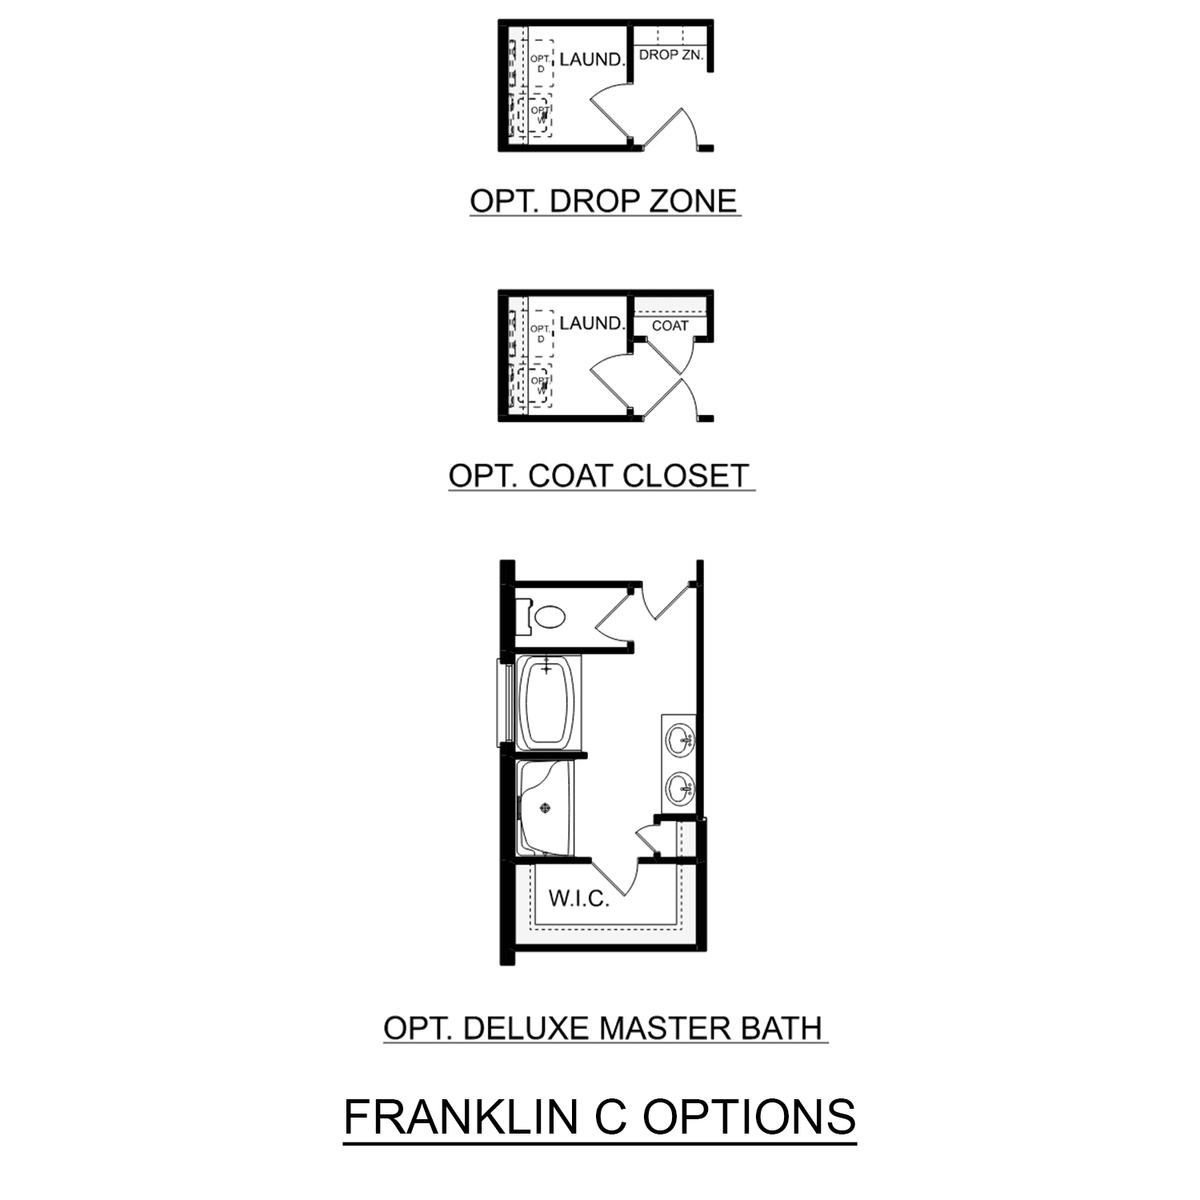 2 - The Franklin C floor plan layout for 14392 Harvest Ridge Lane in Davidson Homes' The Meadows community.